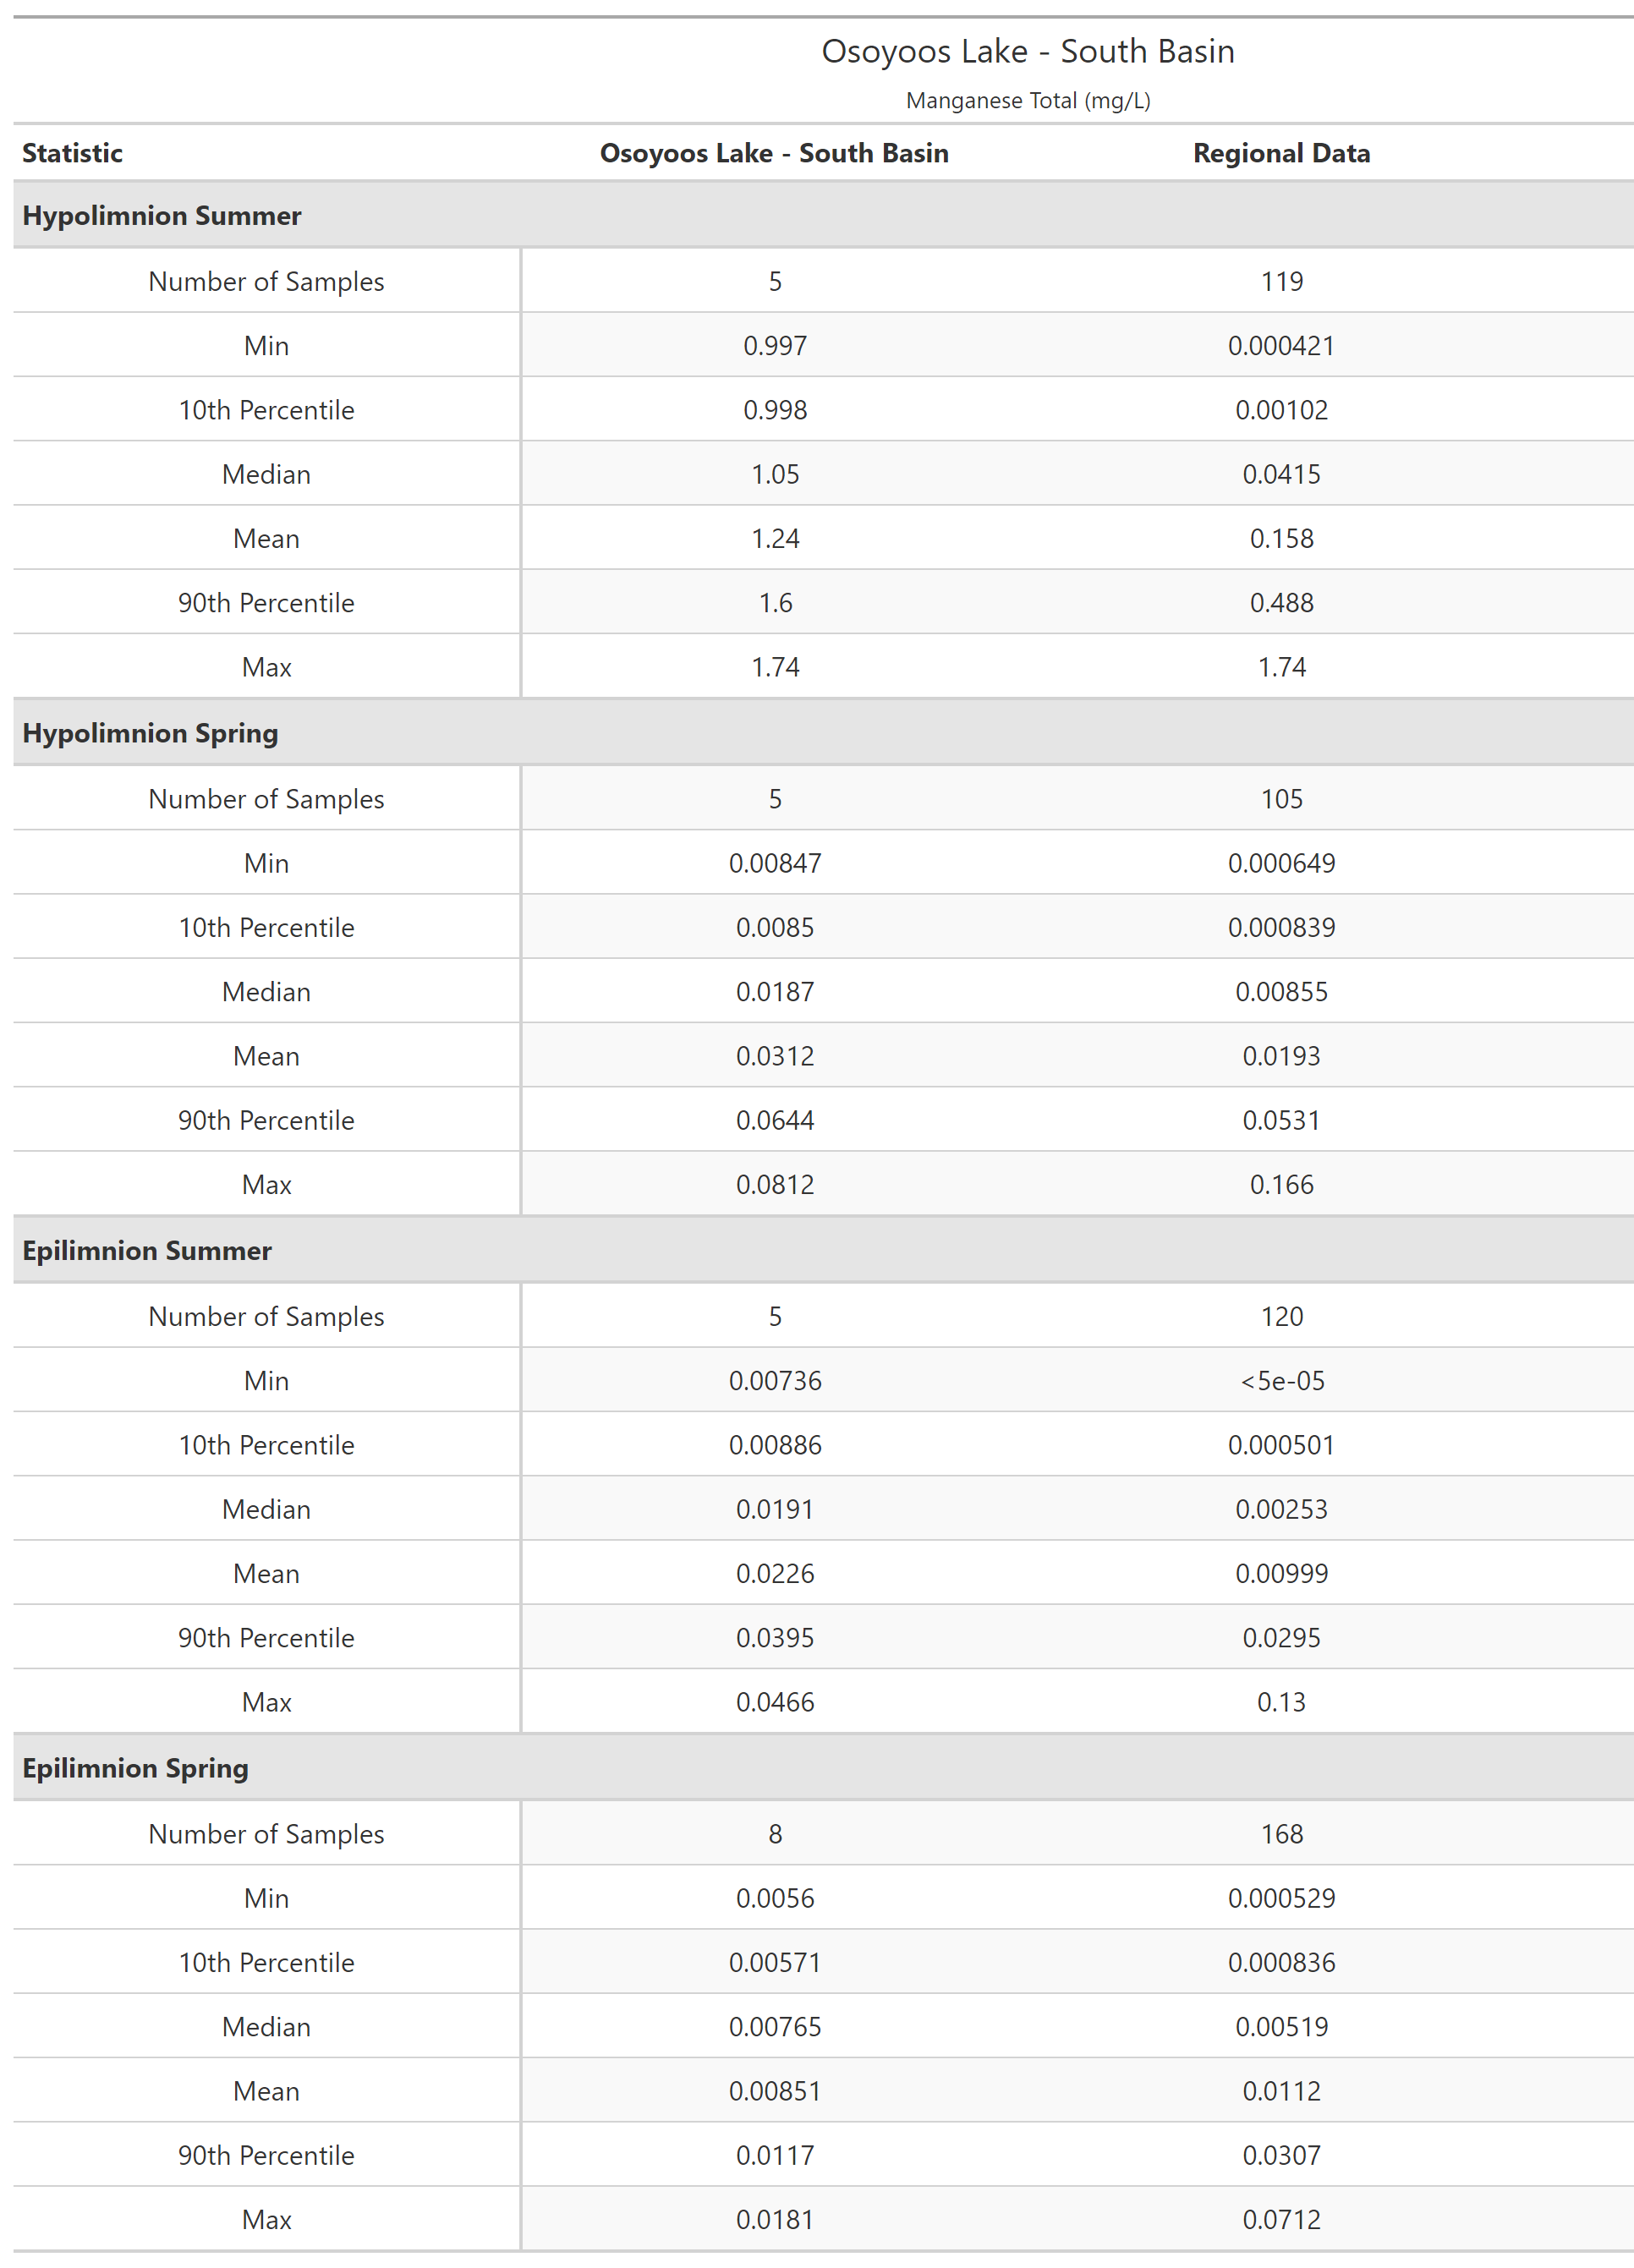 A table of summary statistics for Manganese Total with comparison to regional data